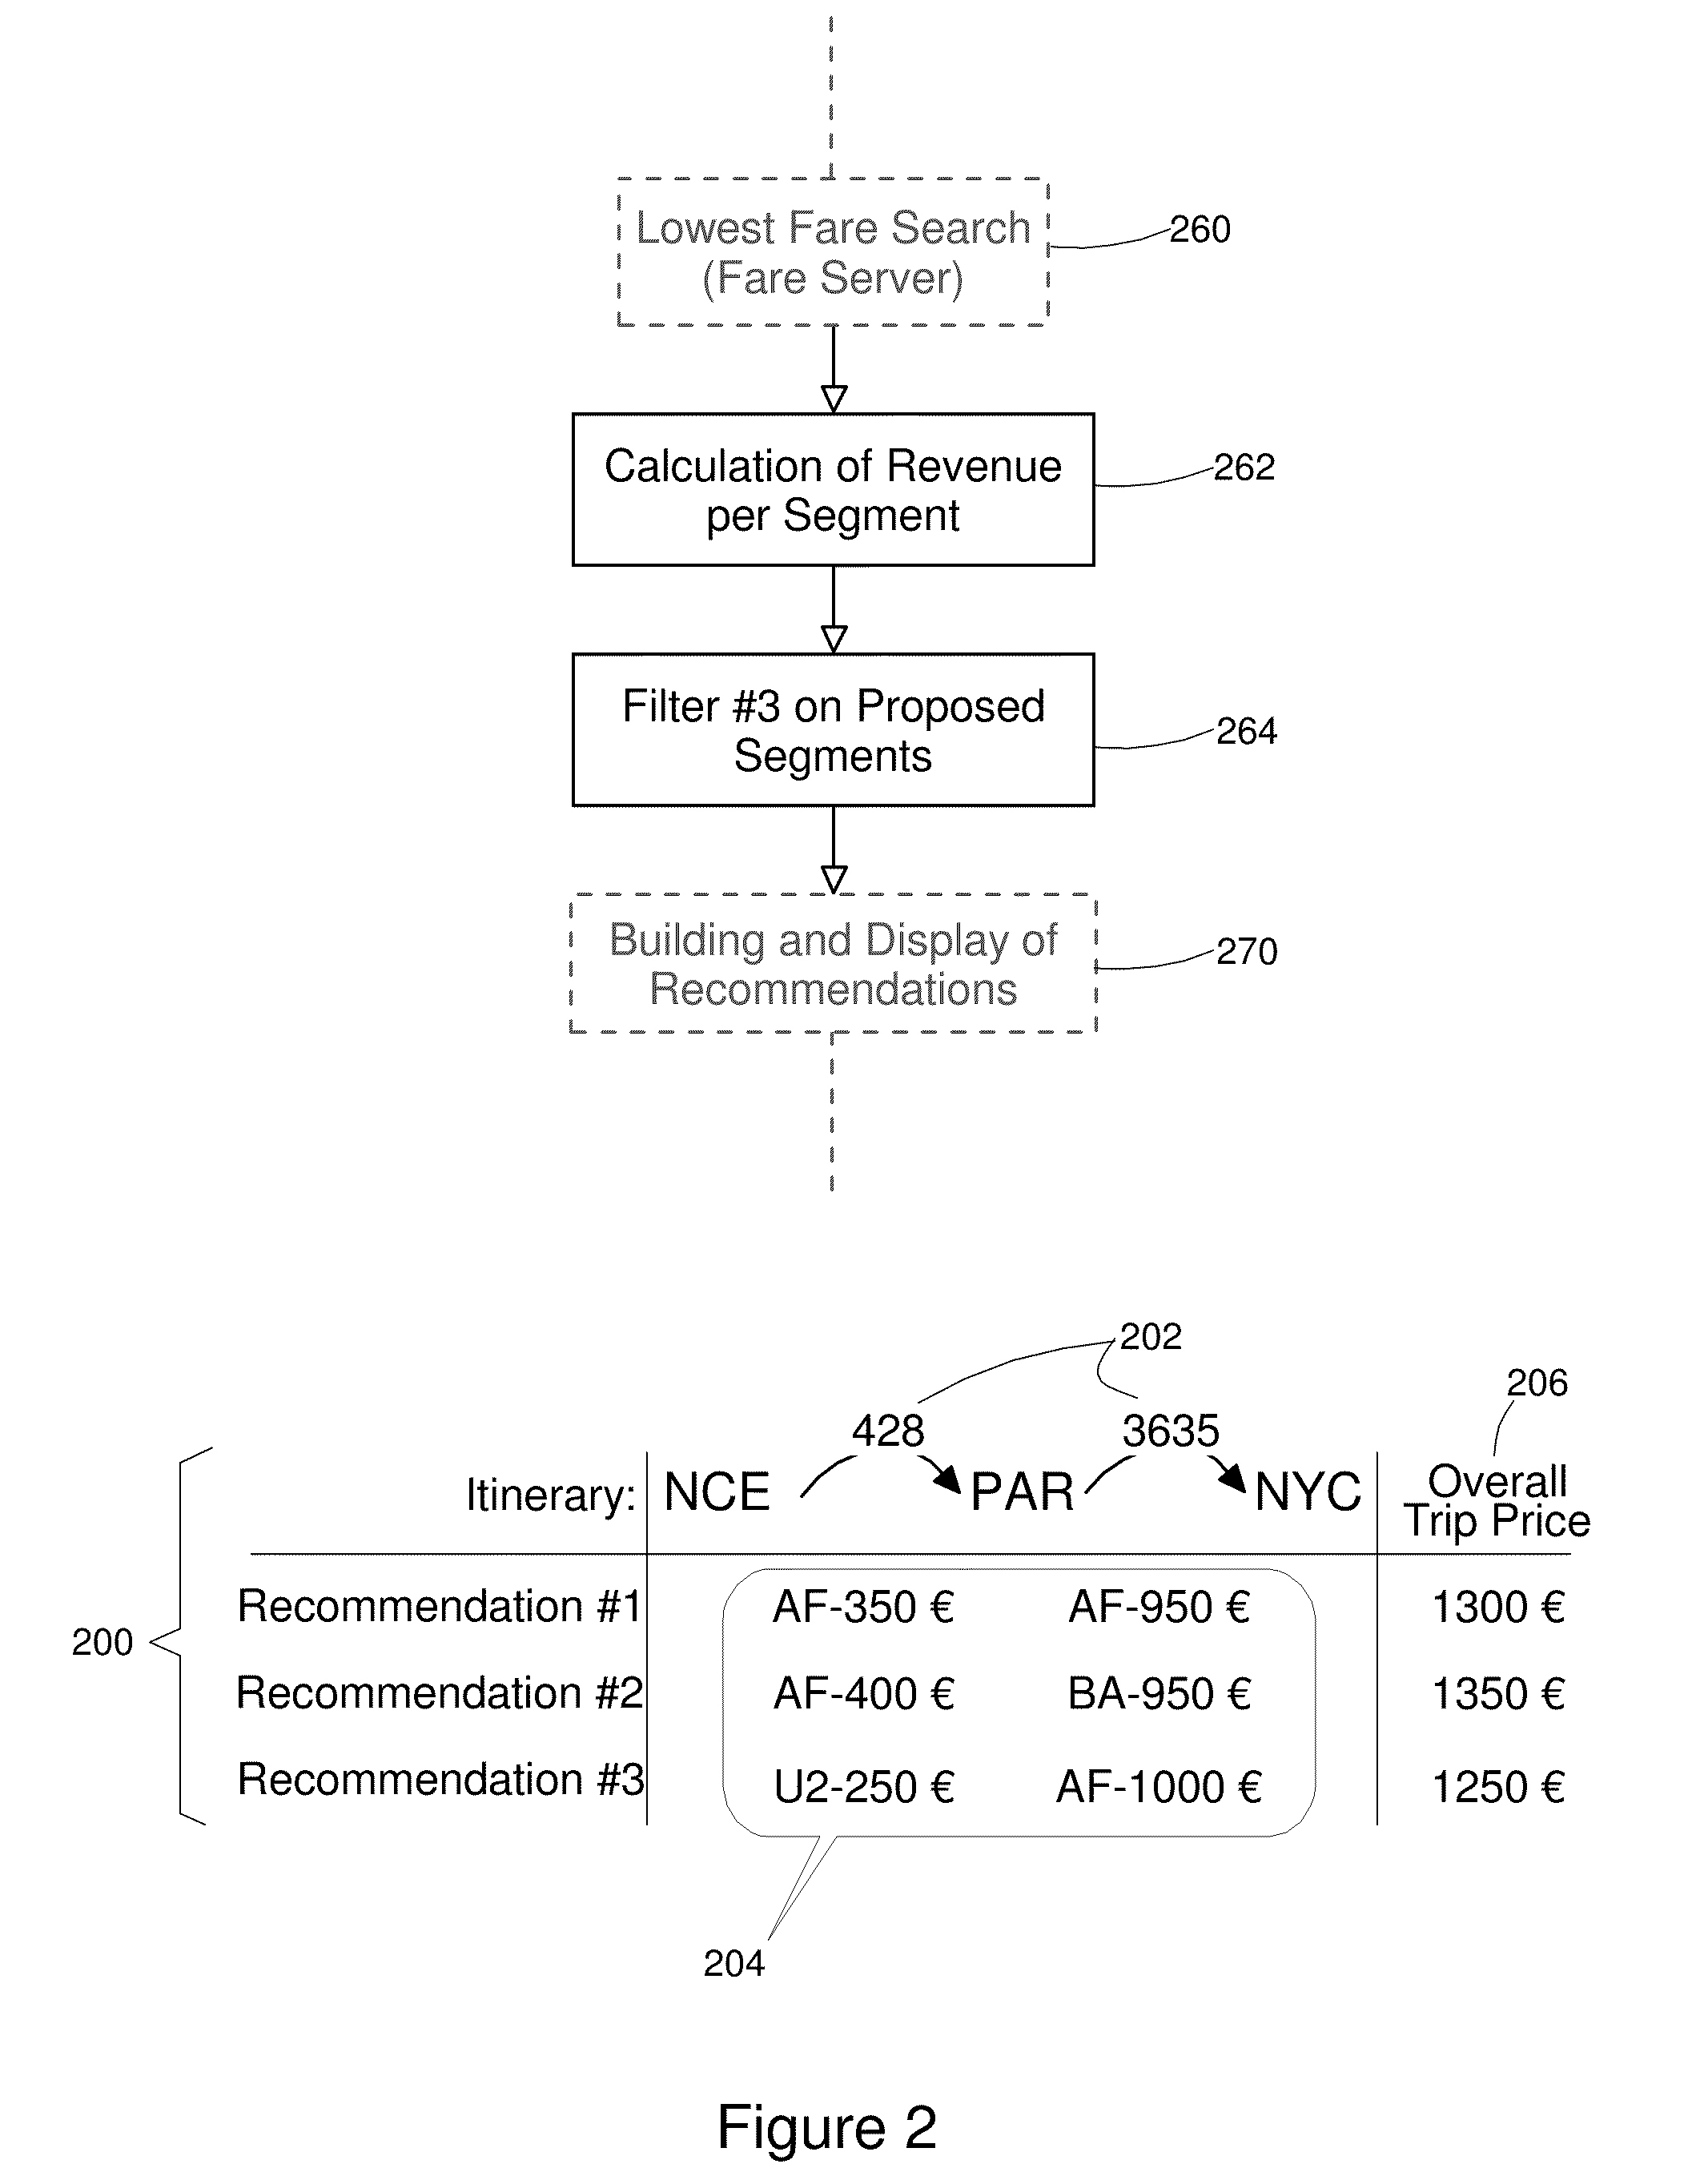 Method and system for displaying interlining travel recommendations